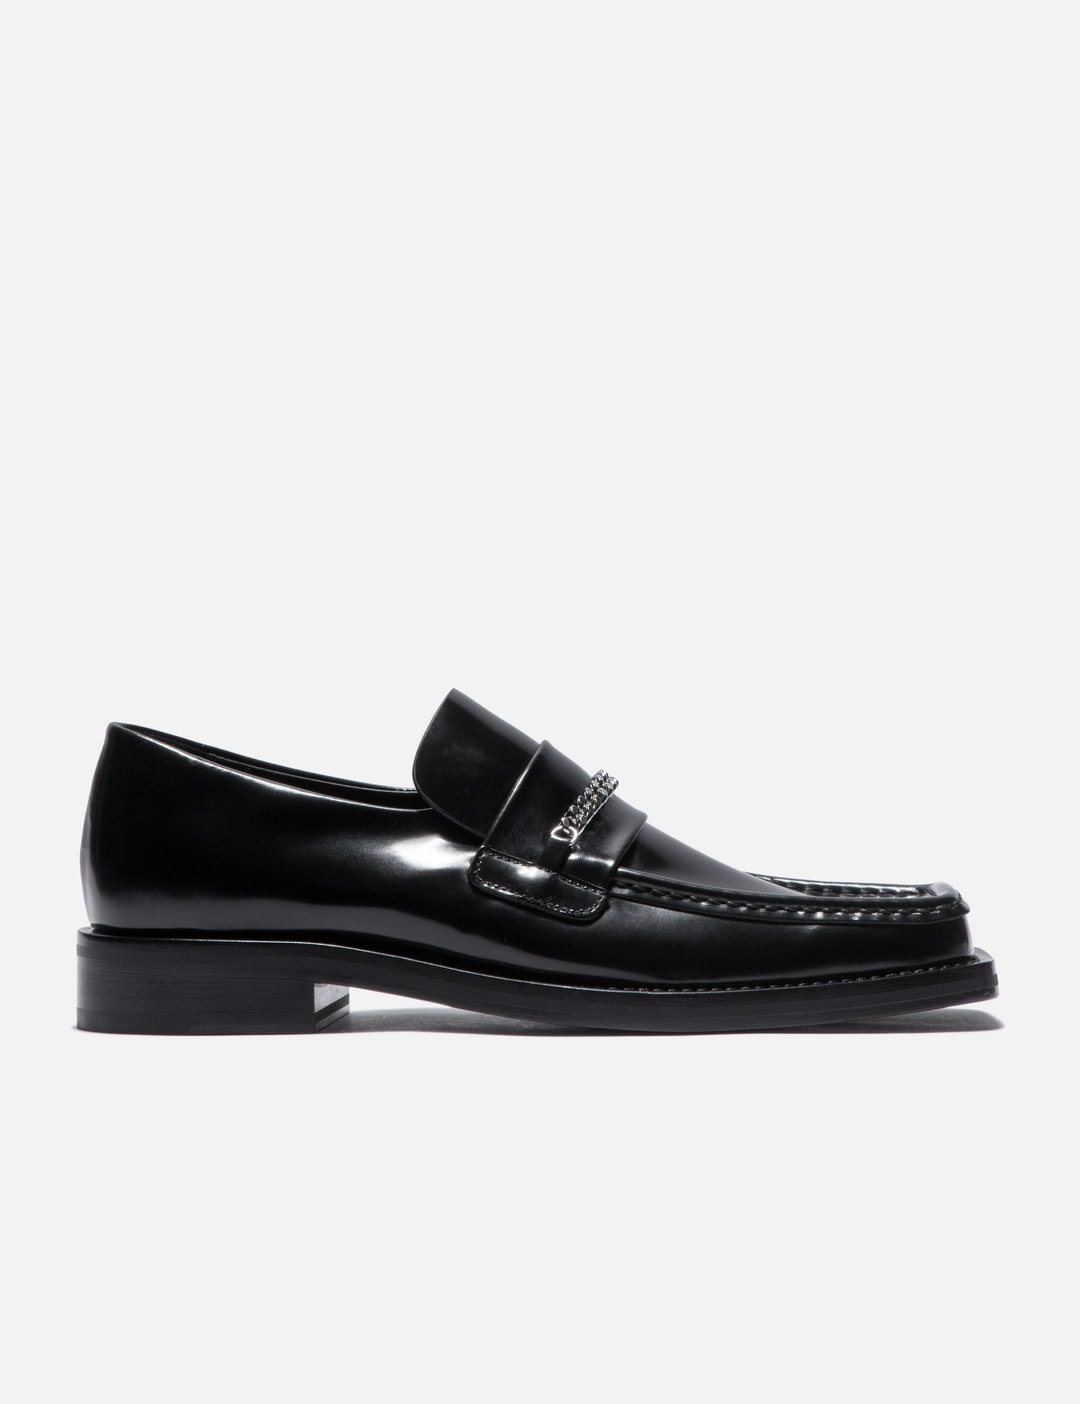 Martine Rose Loafer, Black High Shine at Stand Up Comedy Leather, Metal / High Shine Black / 39